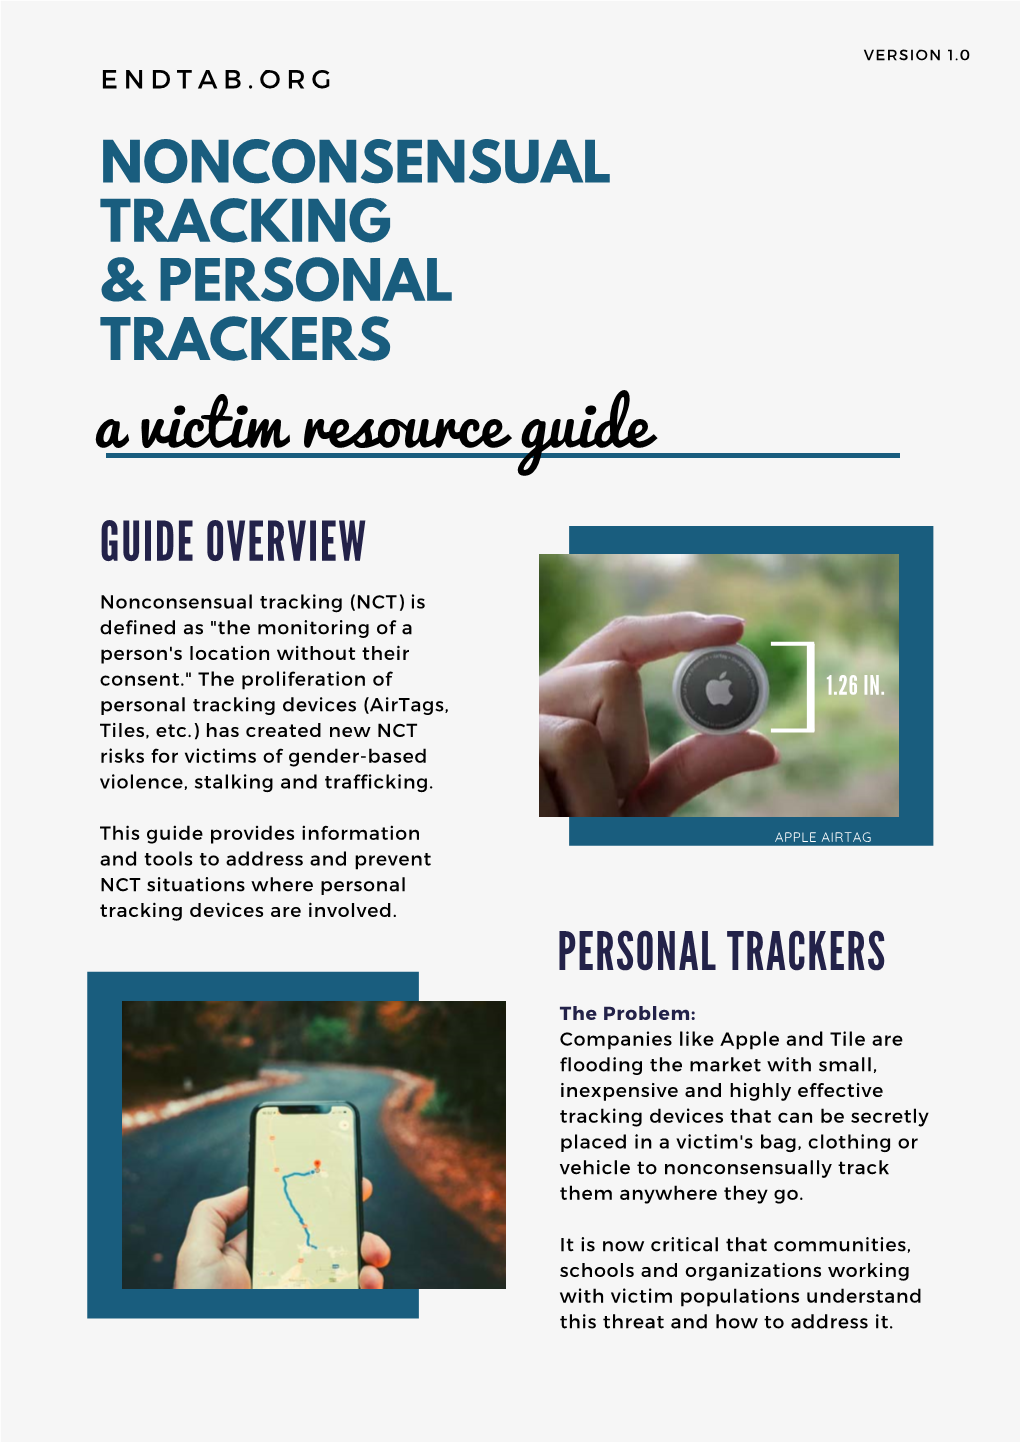 NCT Personal Tracker Safety Guide 1.0 Endtab.Org